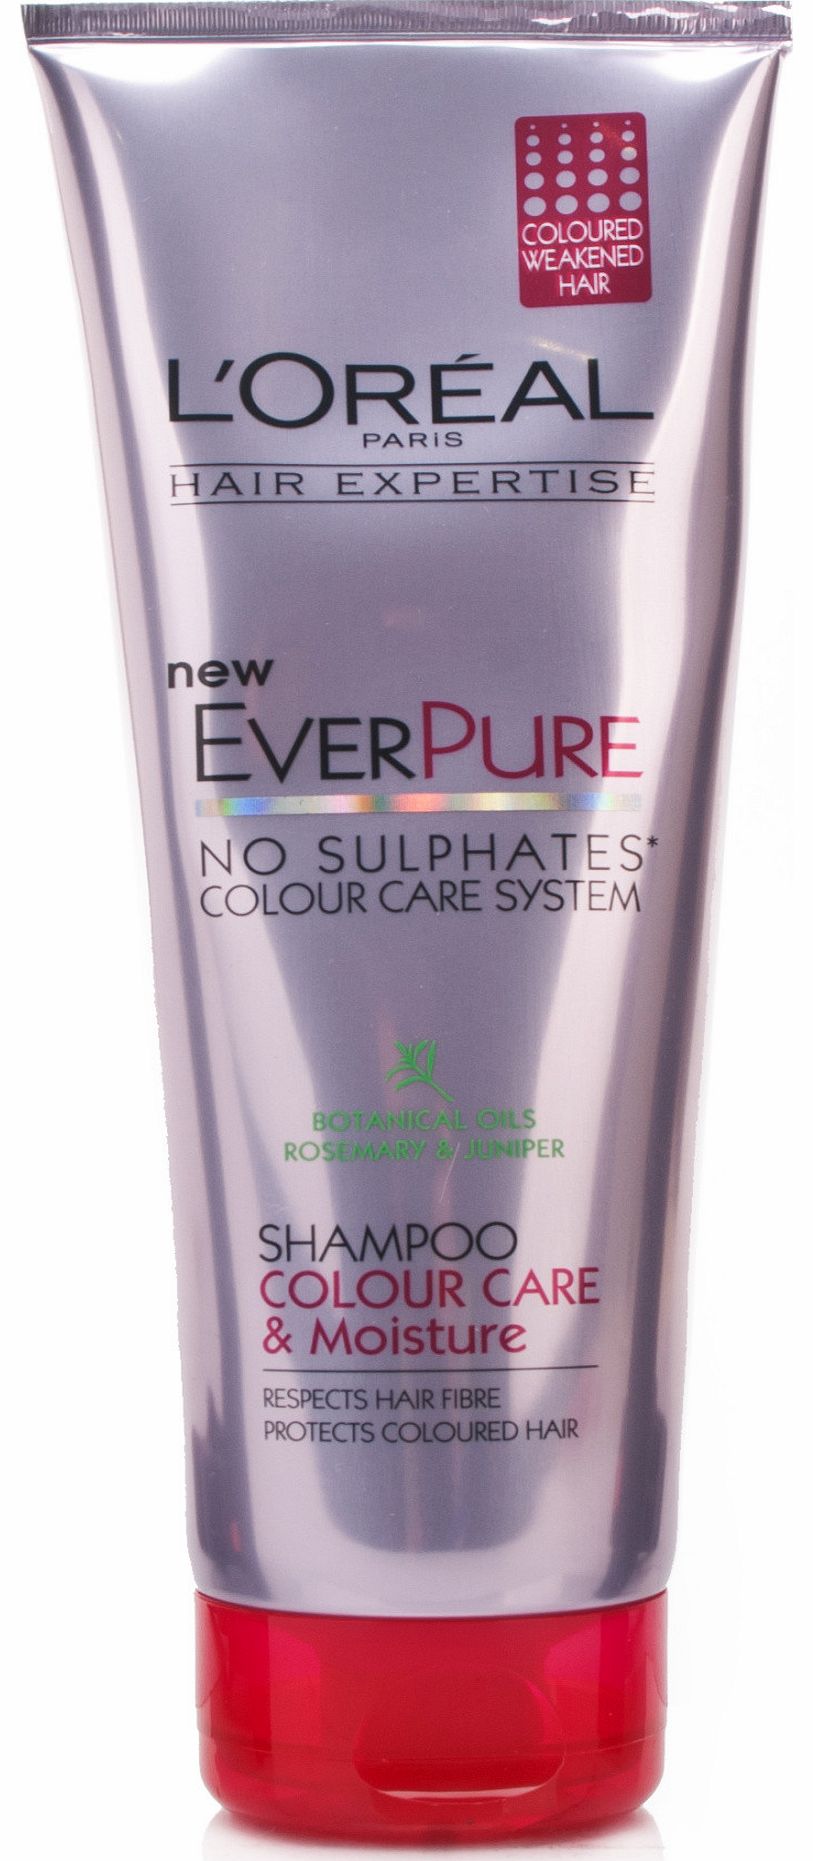 L'Oreal Hair Expertise EverPure Colour Care